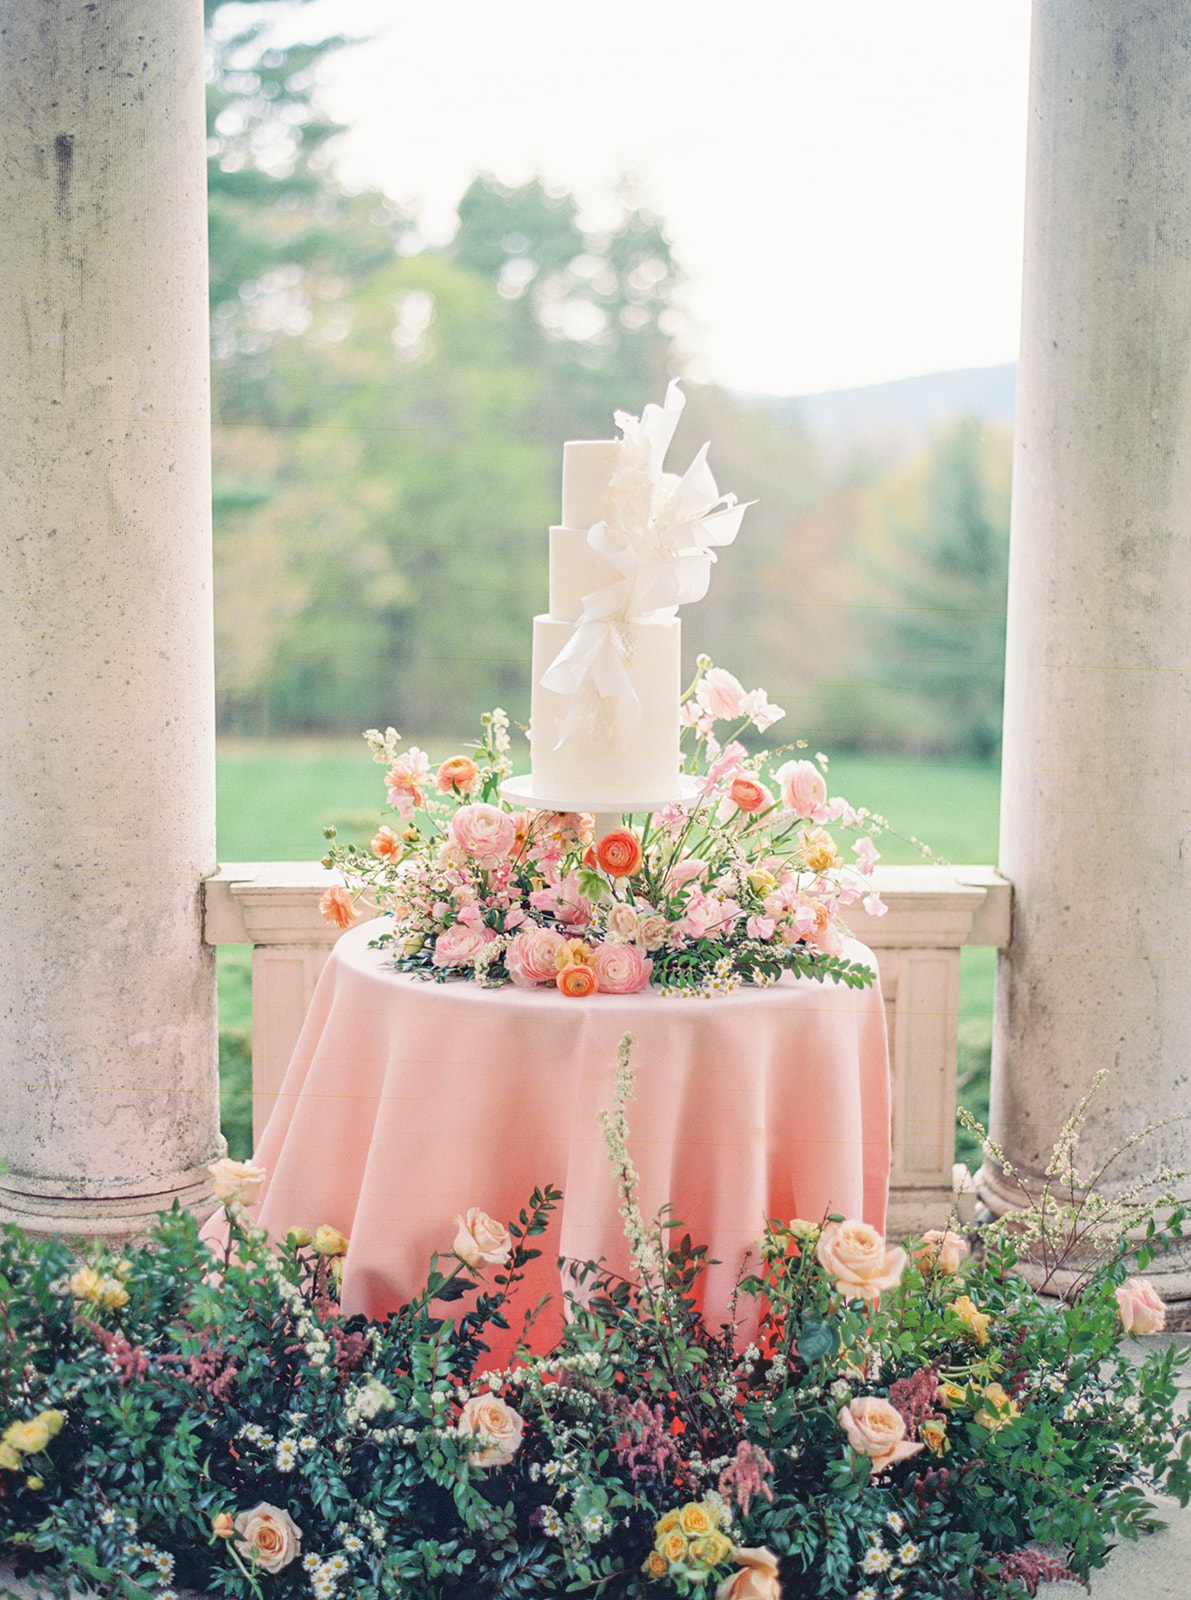 Garden party themed wedding cake table with pastel flowers